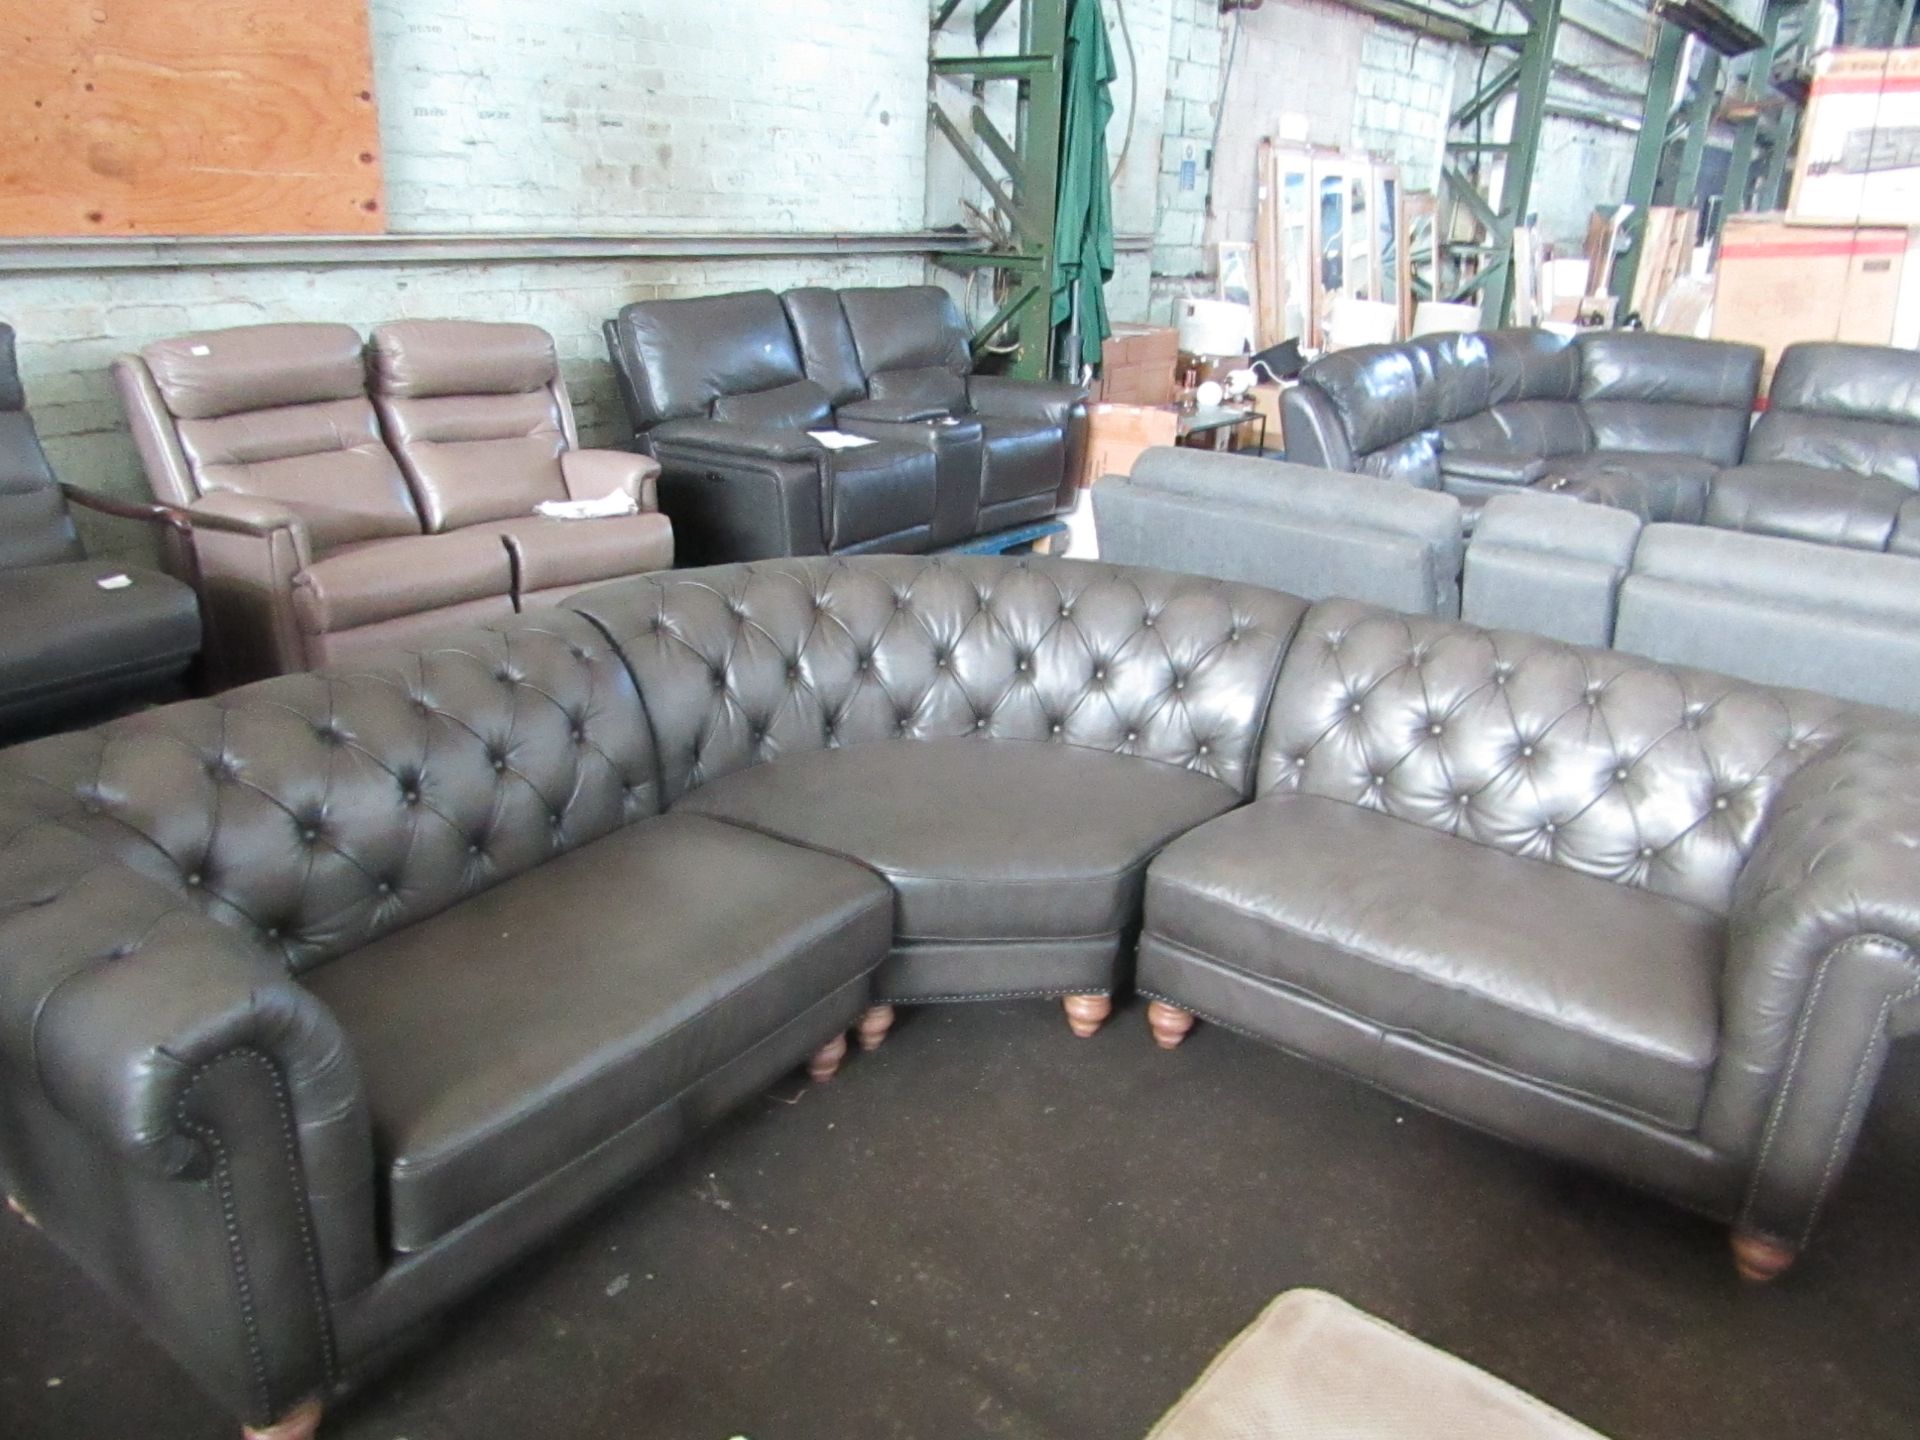 Allington Grey Leather Chesterfield Corner Sofa - Looks In Good Condition, May Contain Slight - Image 2 of 5